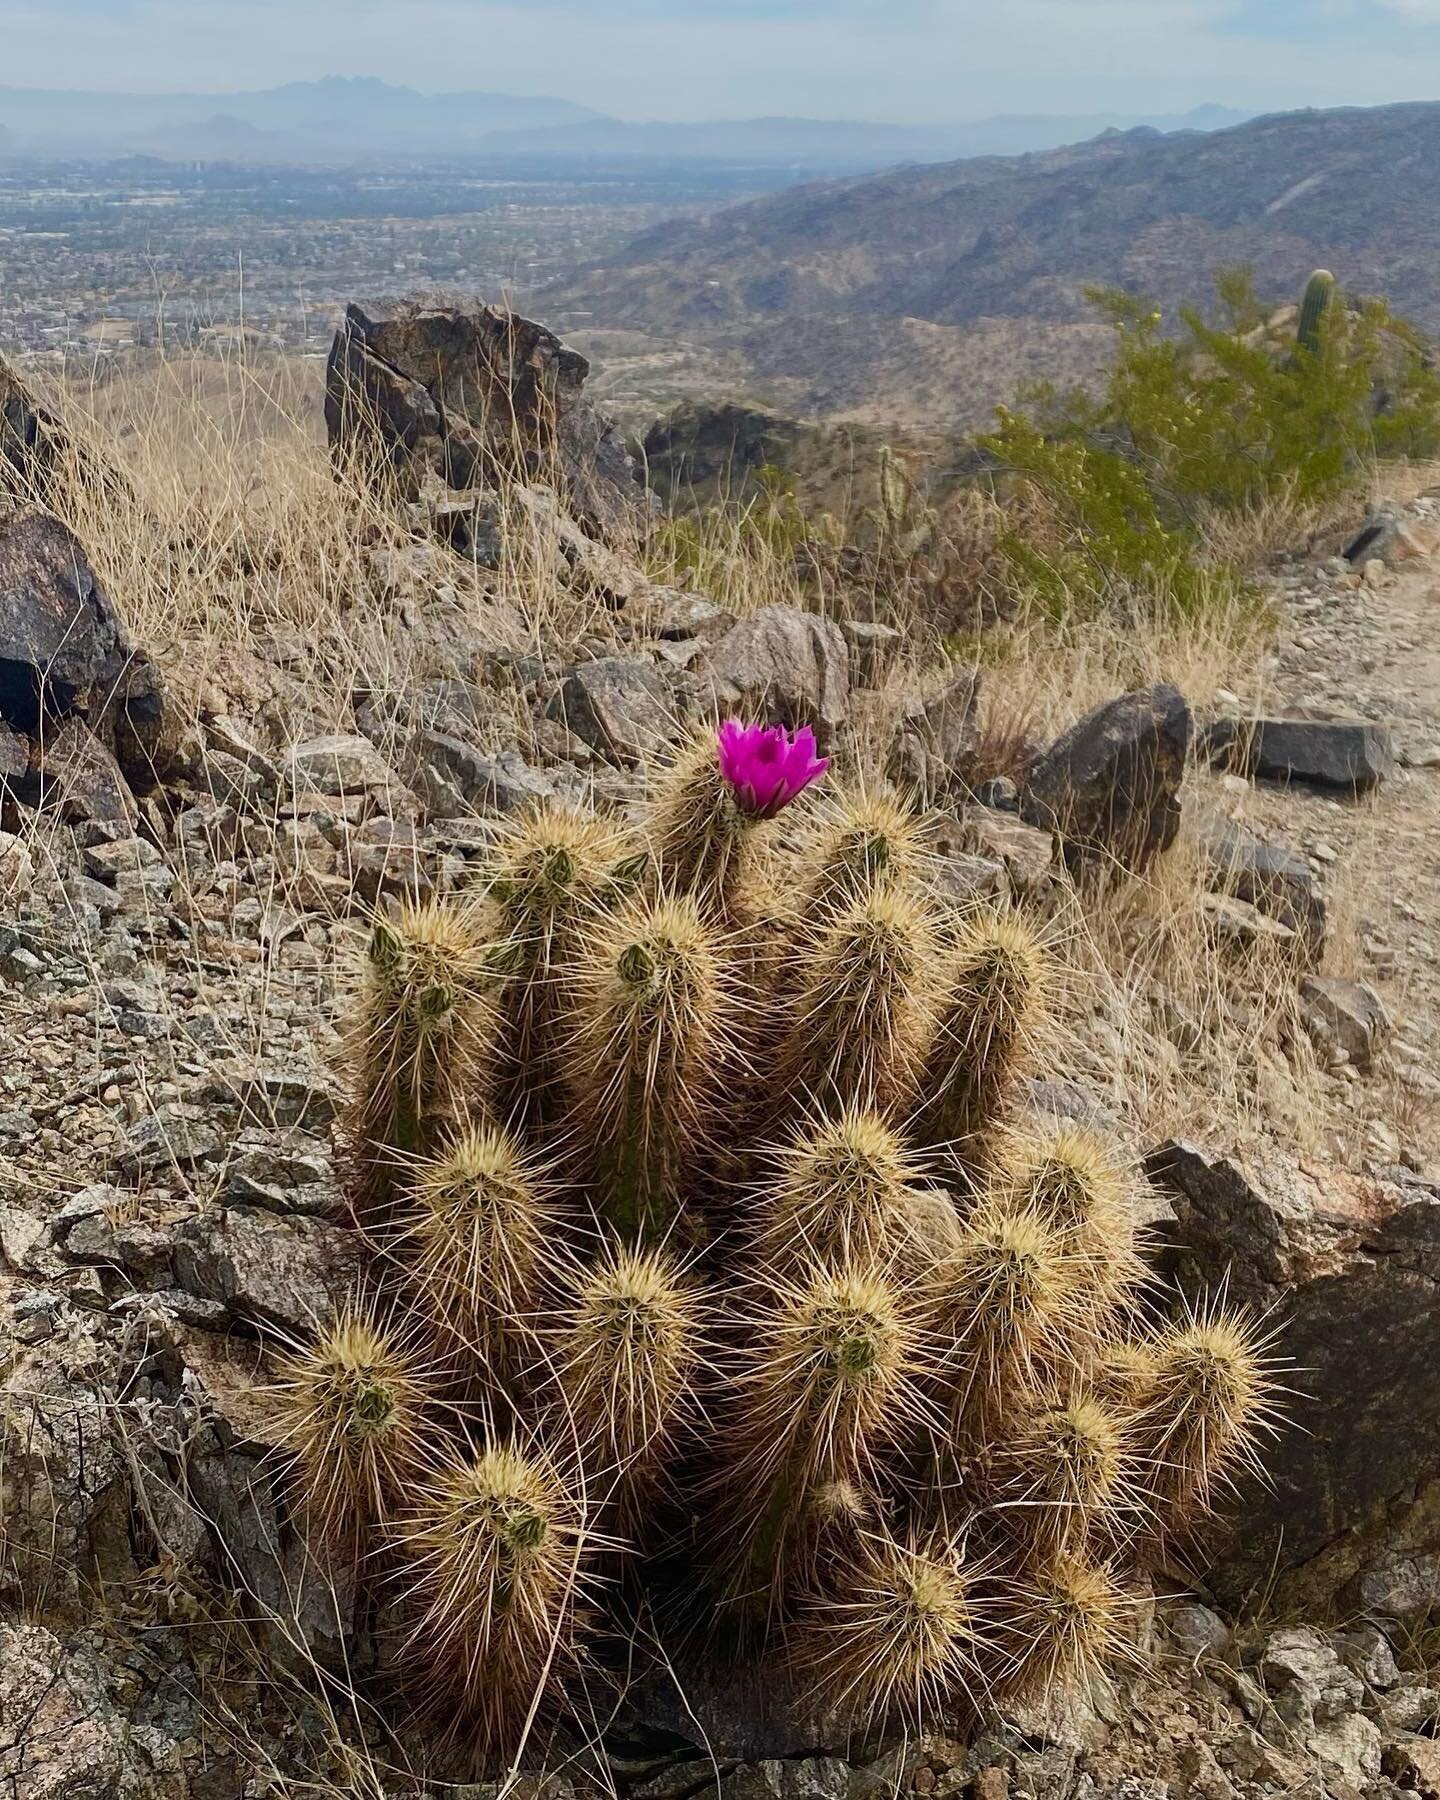 The desert is blooming 🌵